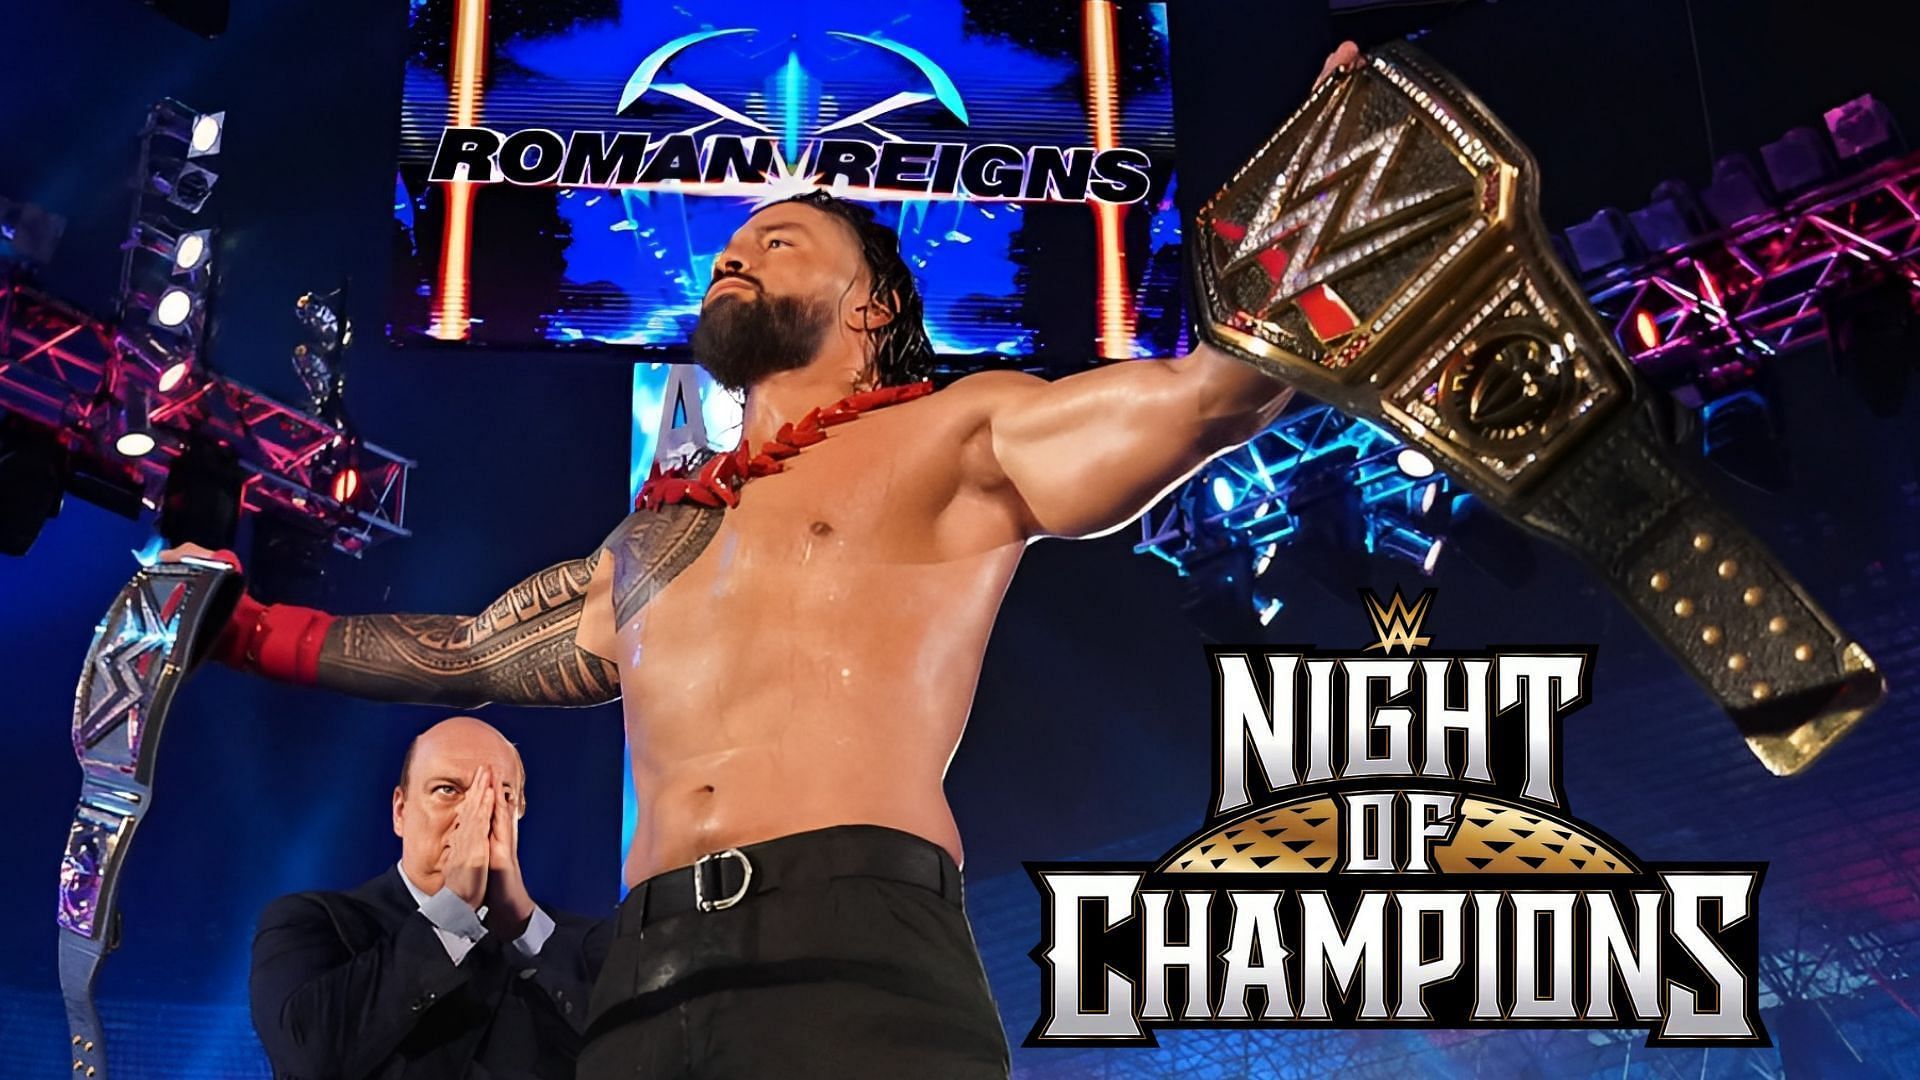 Roman Reigns is nearing the 1,000-day milestone as WWE Universal Champion!